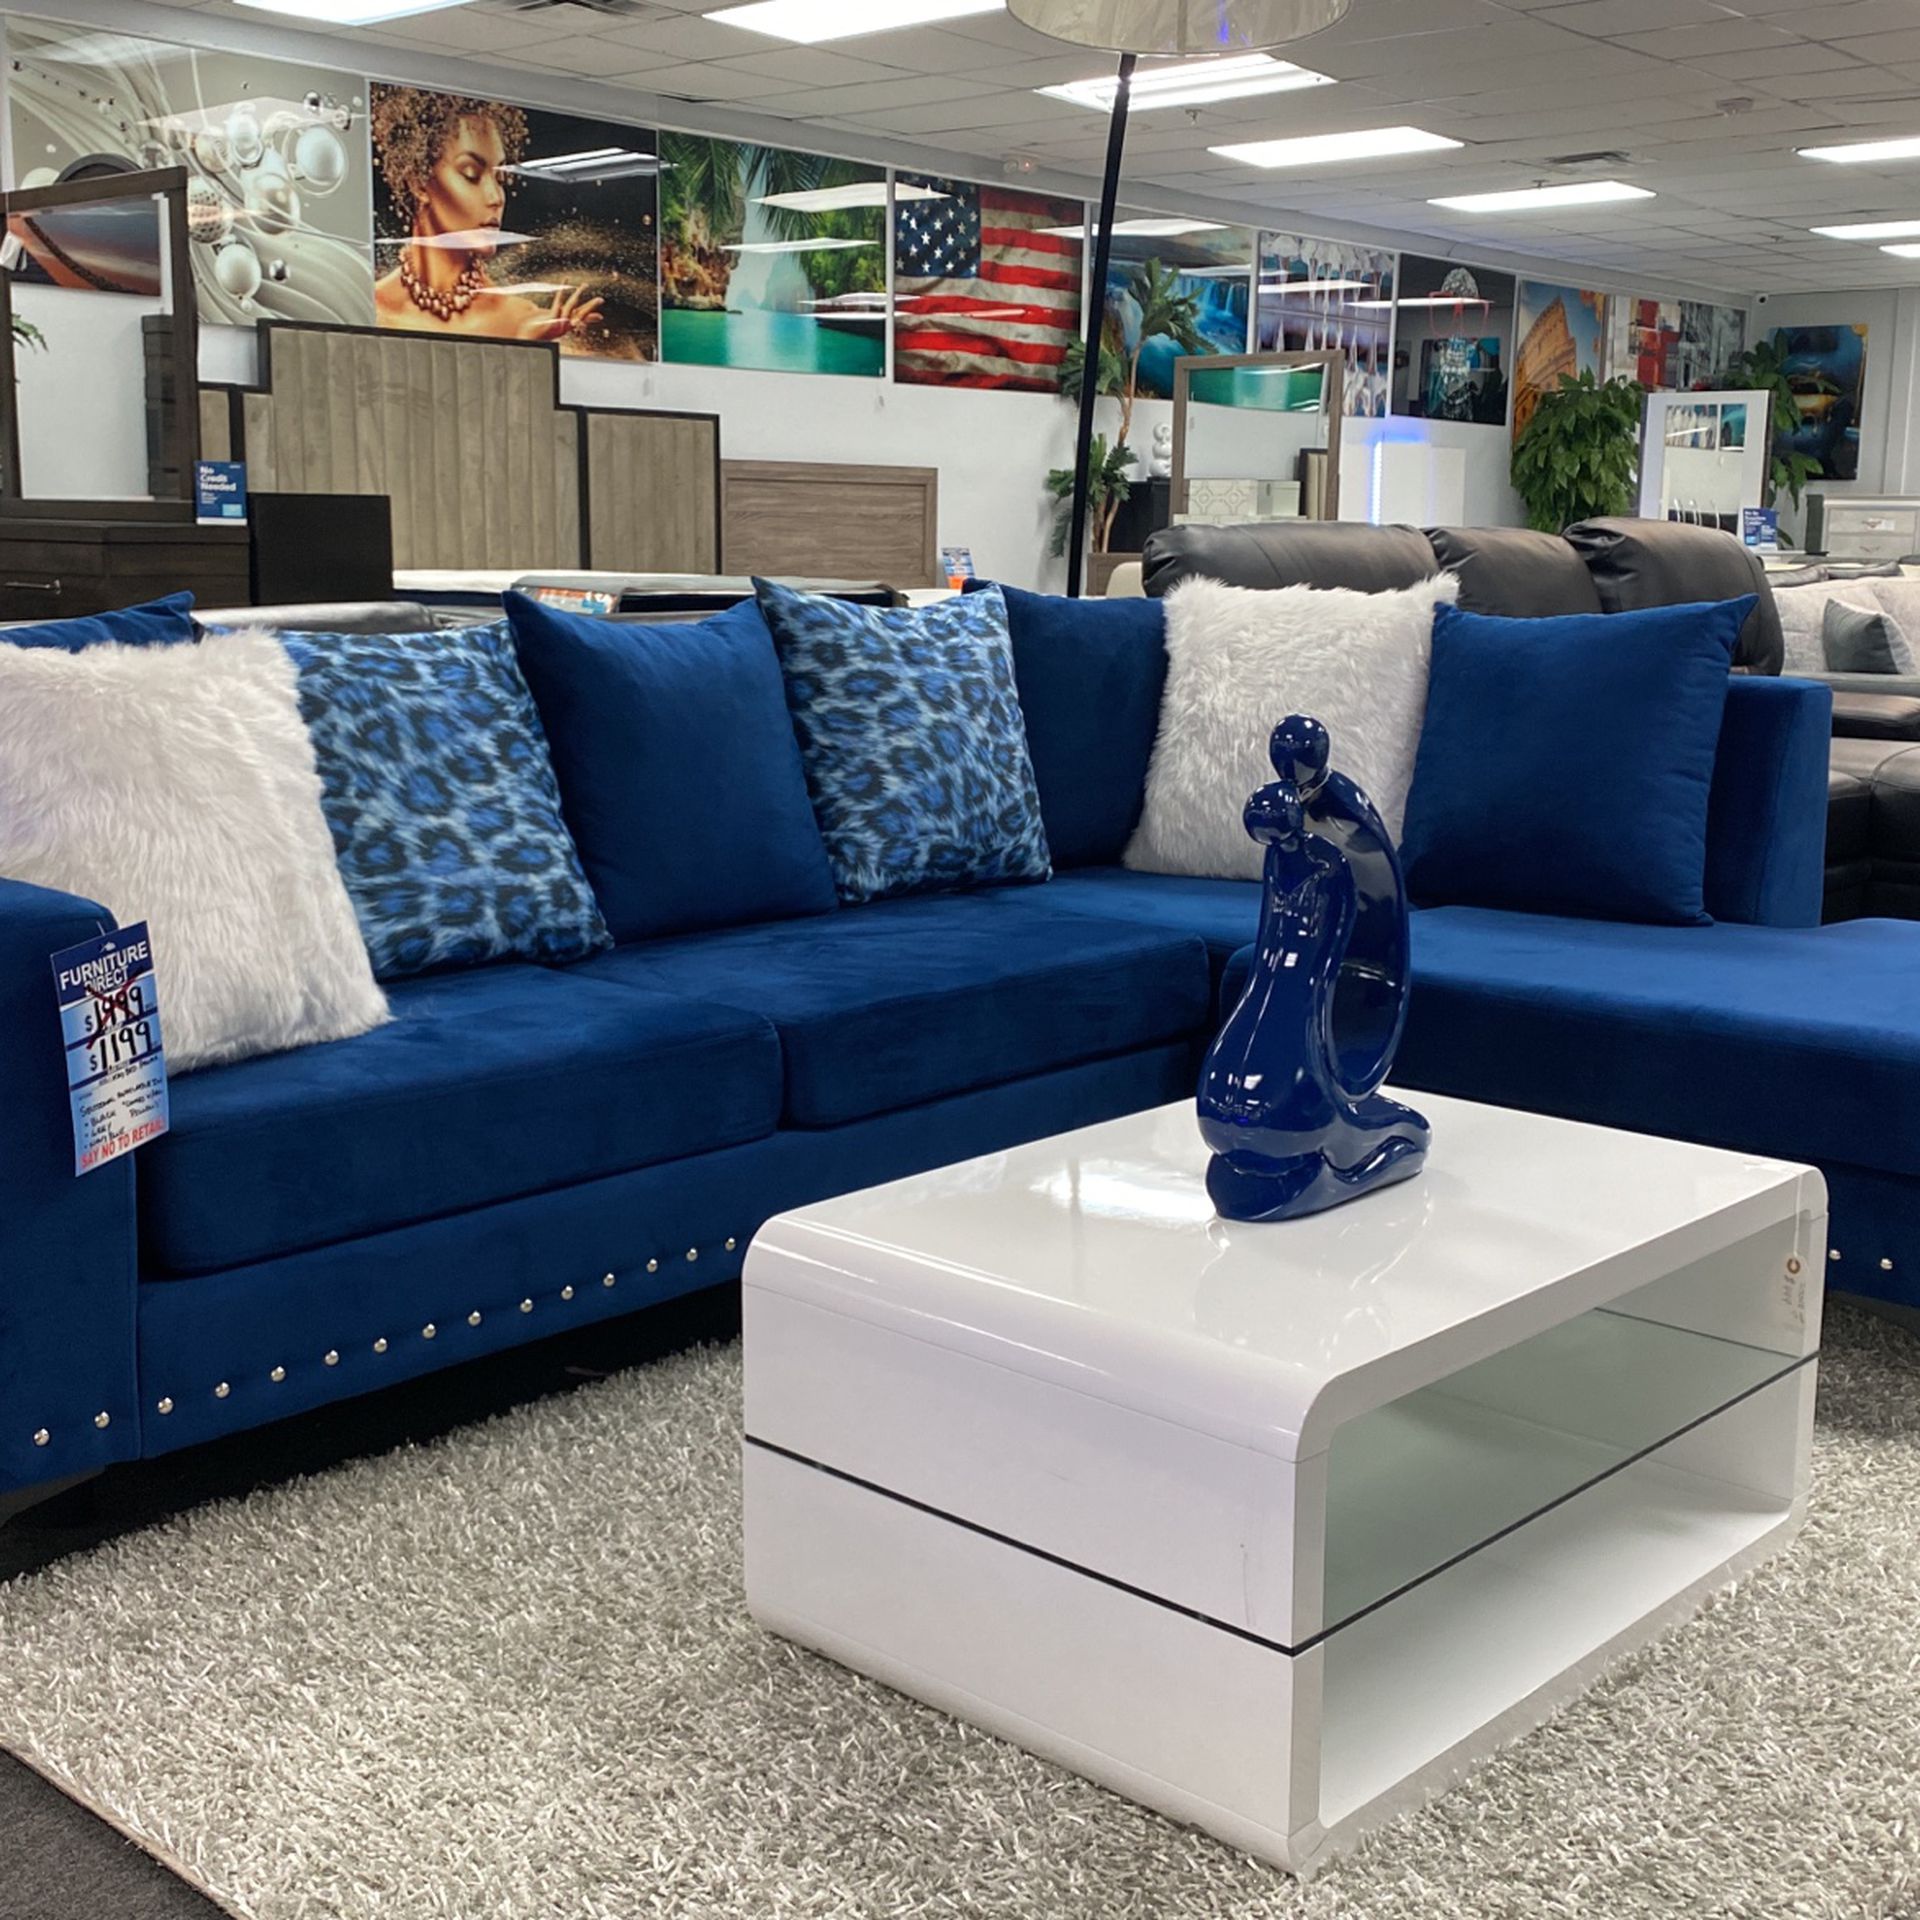 Modern Sectional Available In Black And Grey! Comes With All Pillows!